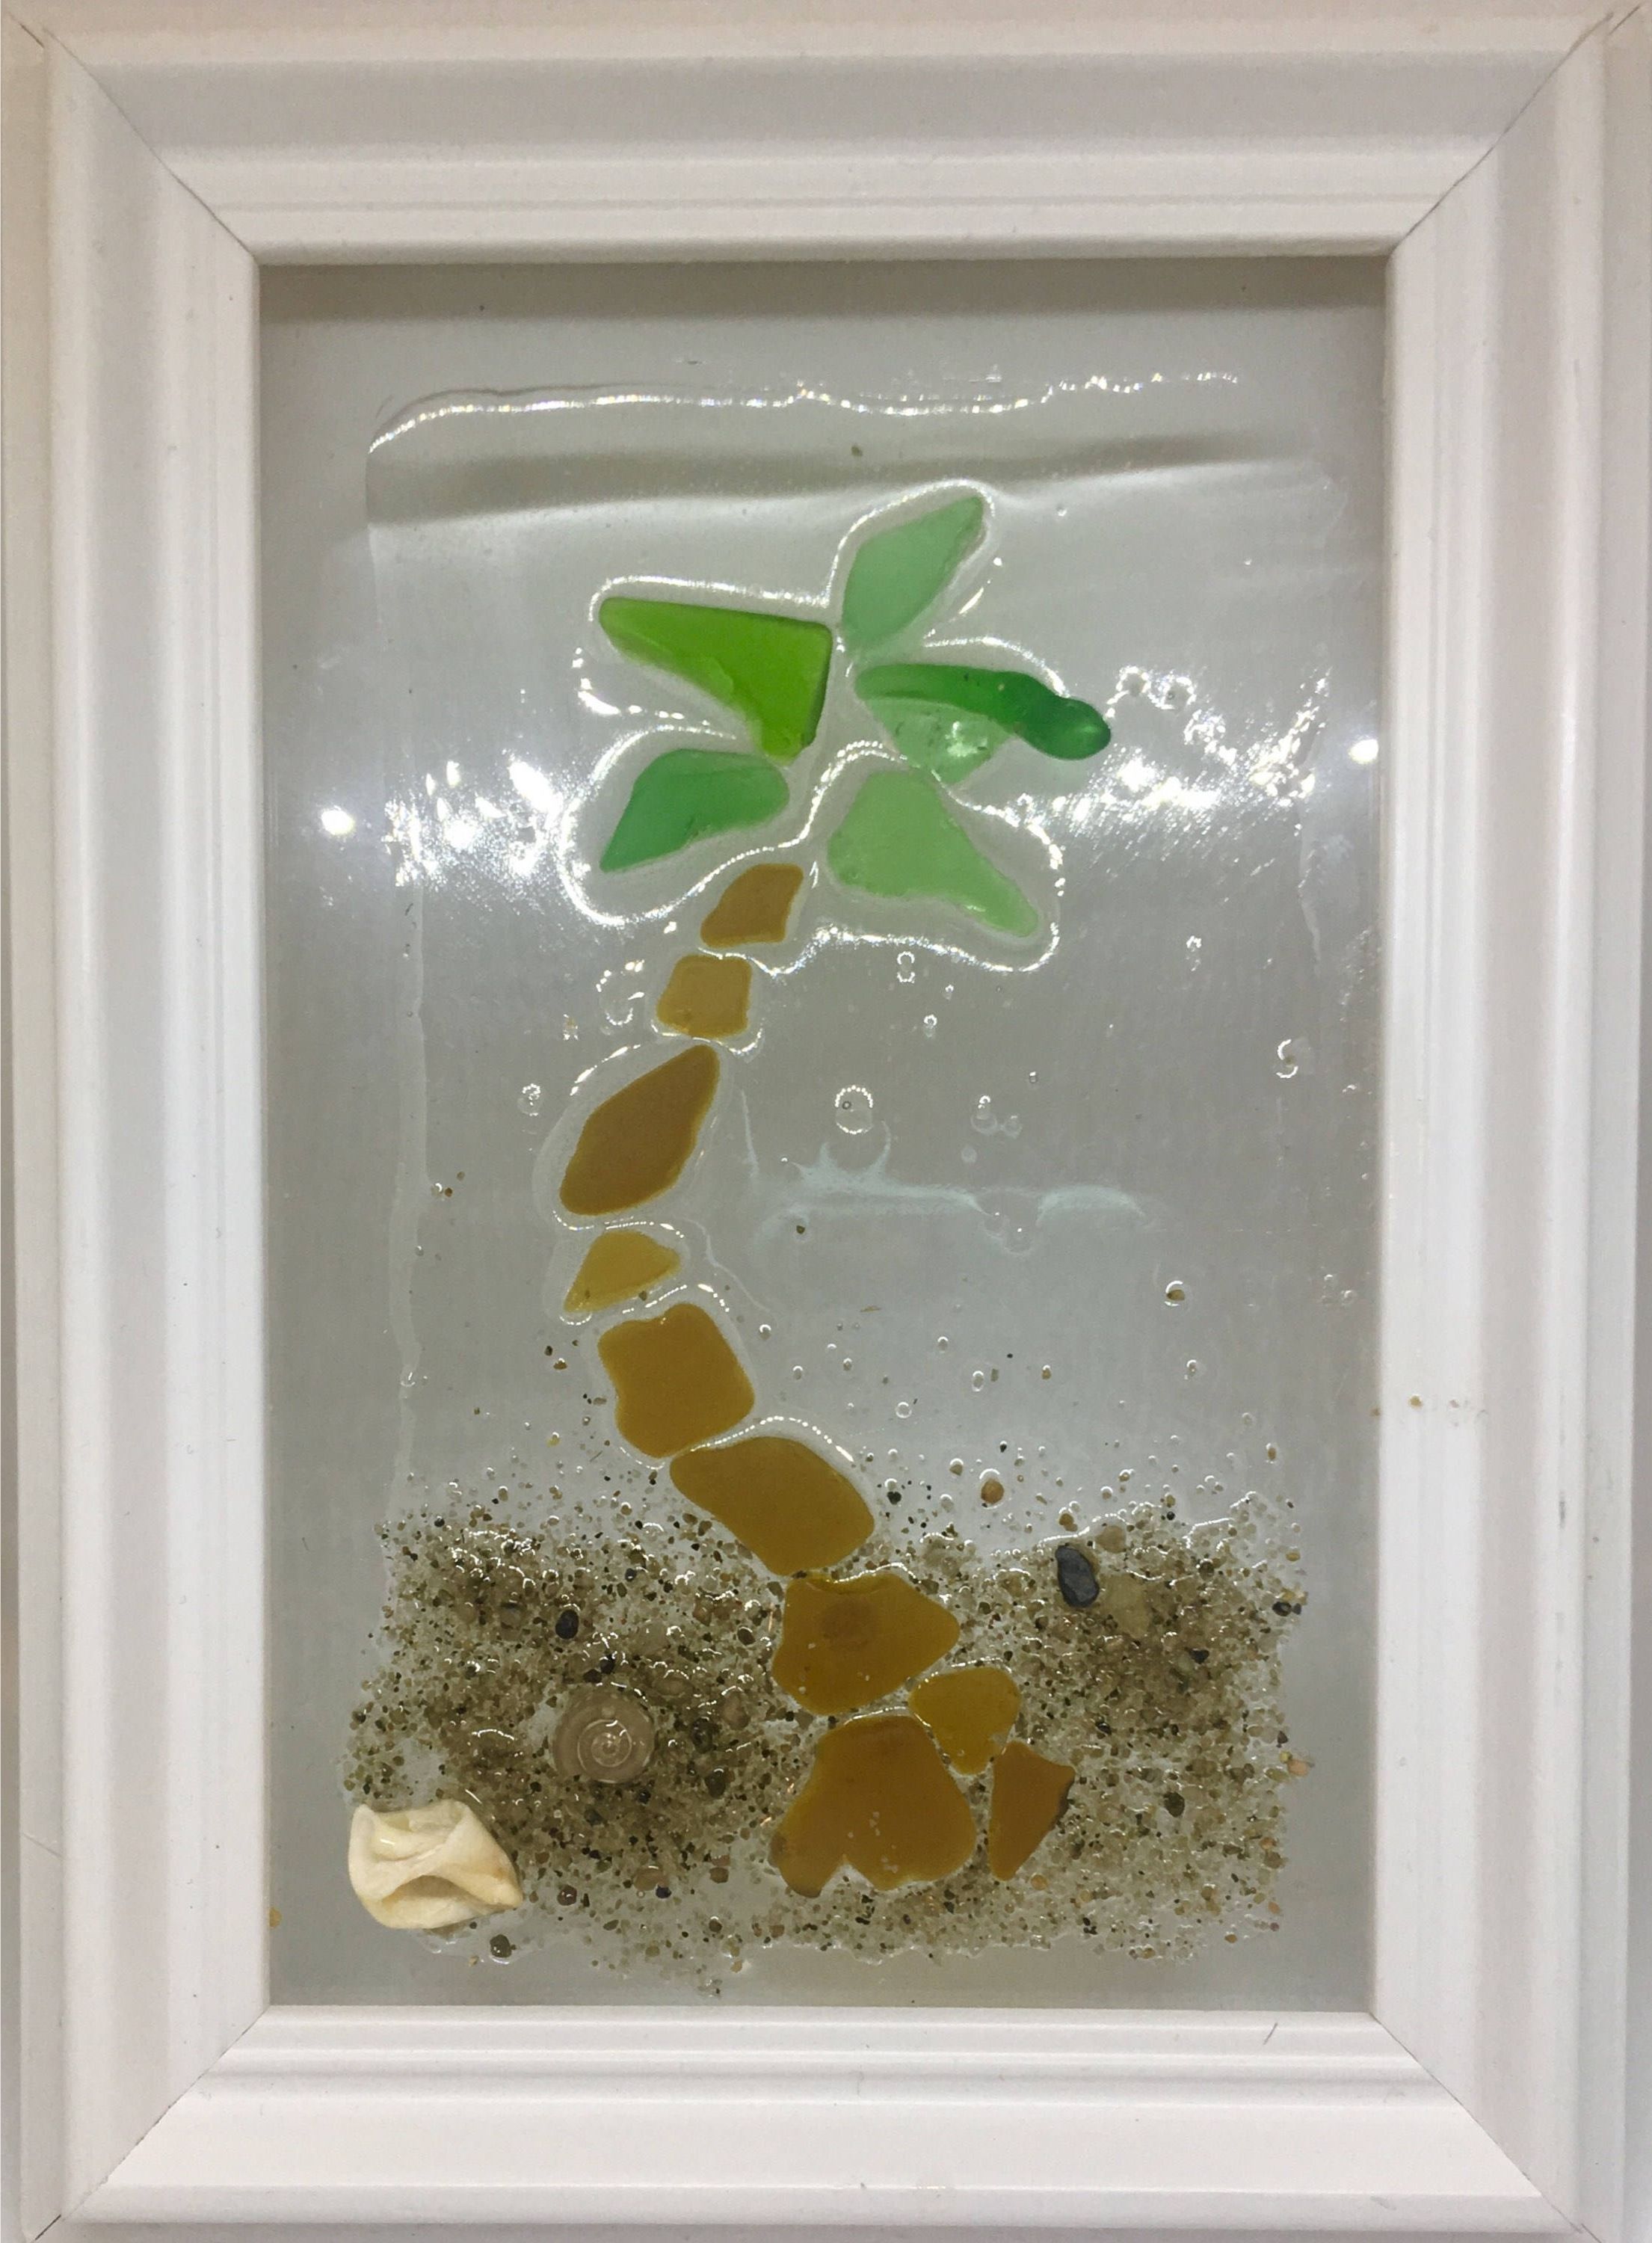 Sea Glass Wall Art: Palm Tree Design Made From Genuine Sea Glass 4x6 Pertaining To Most Current Sea Glass Wall Art (View 2 of 15)